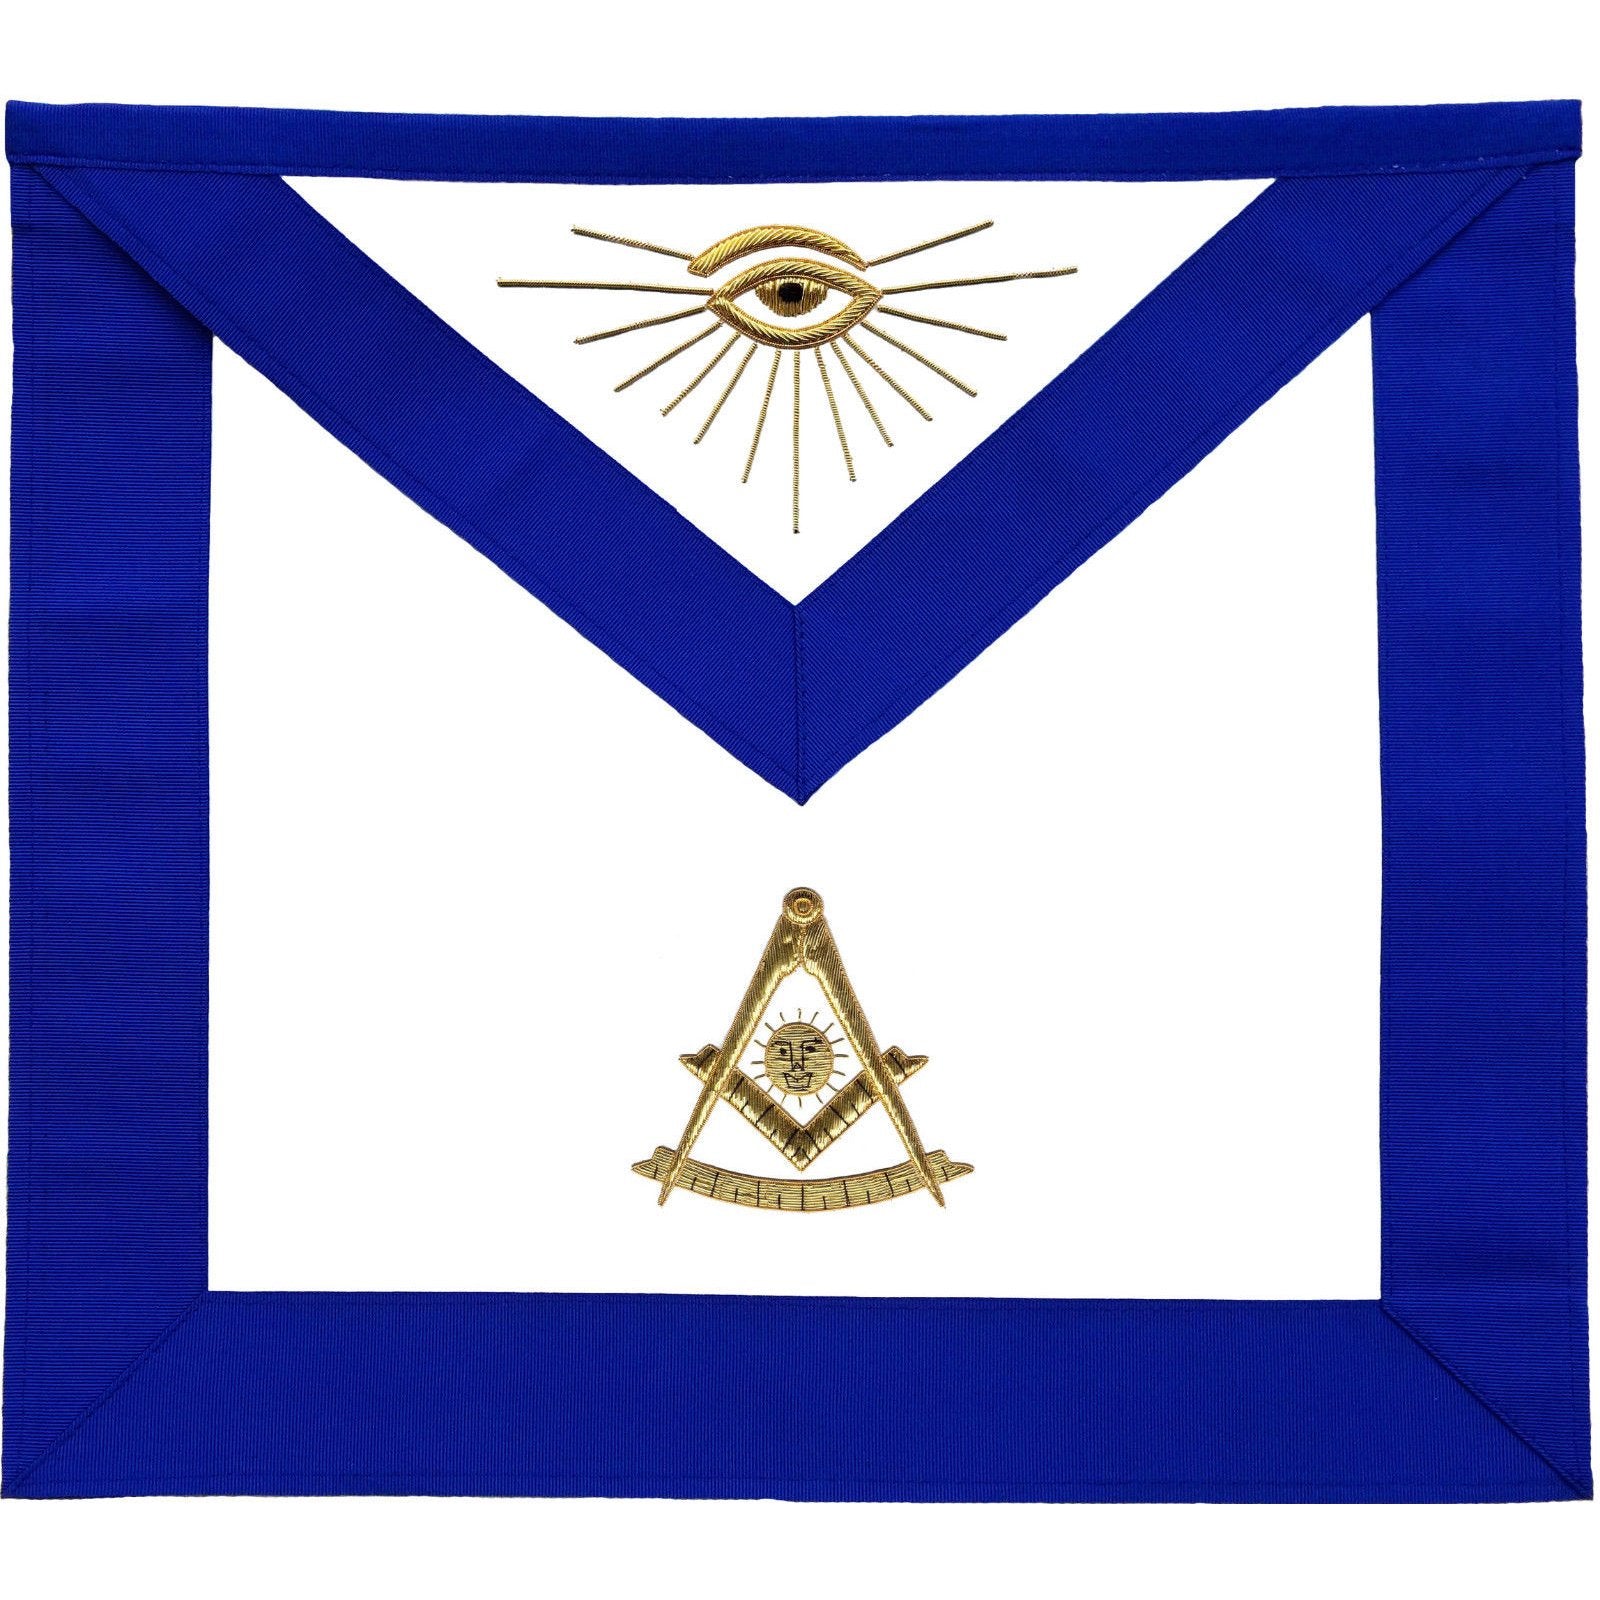 Past Master Blue Lodge Apron - Blue Grosgrain with Gold Hand Embroidery - Bricks Masons